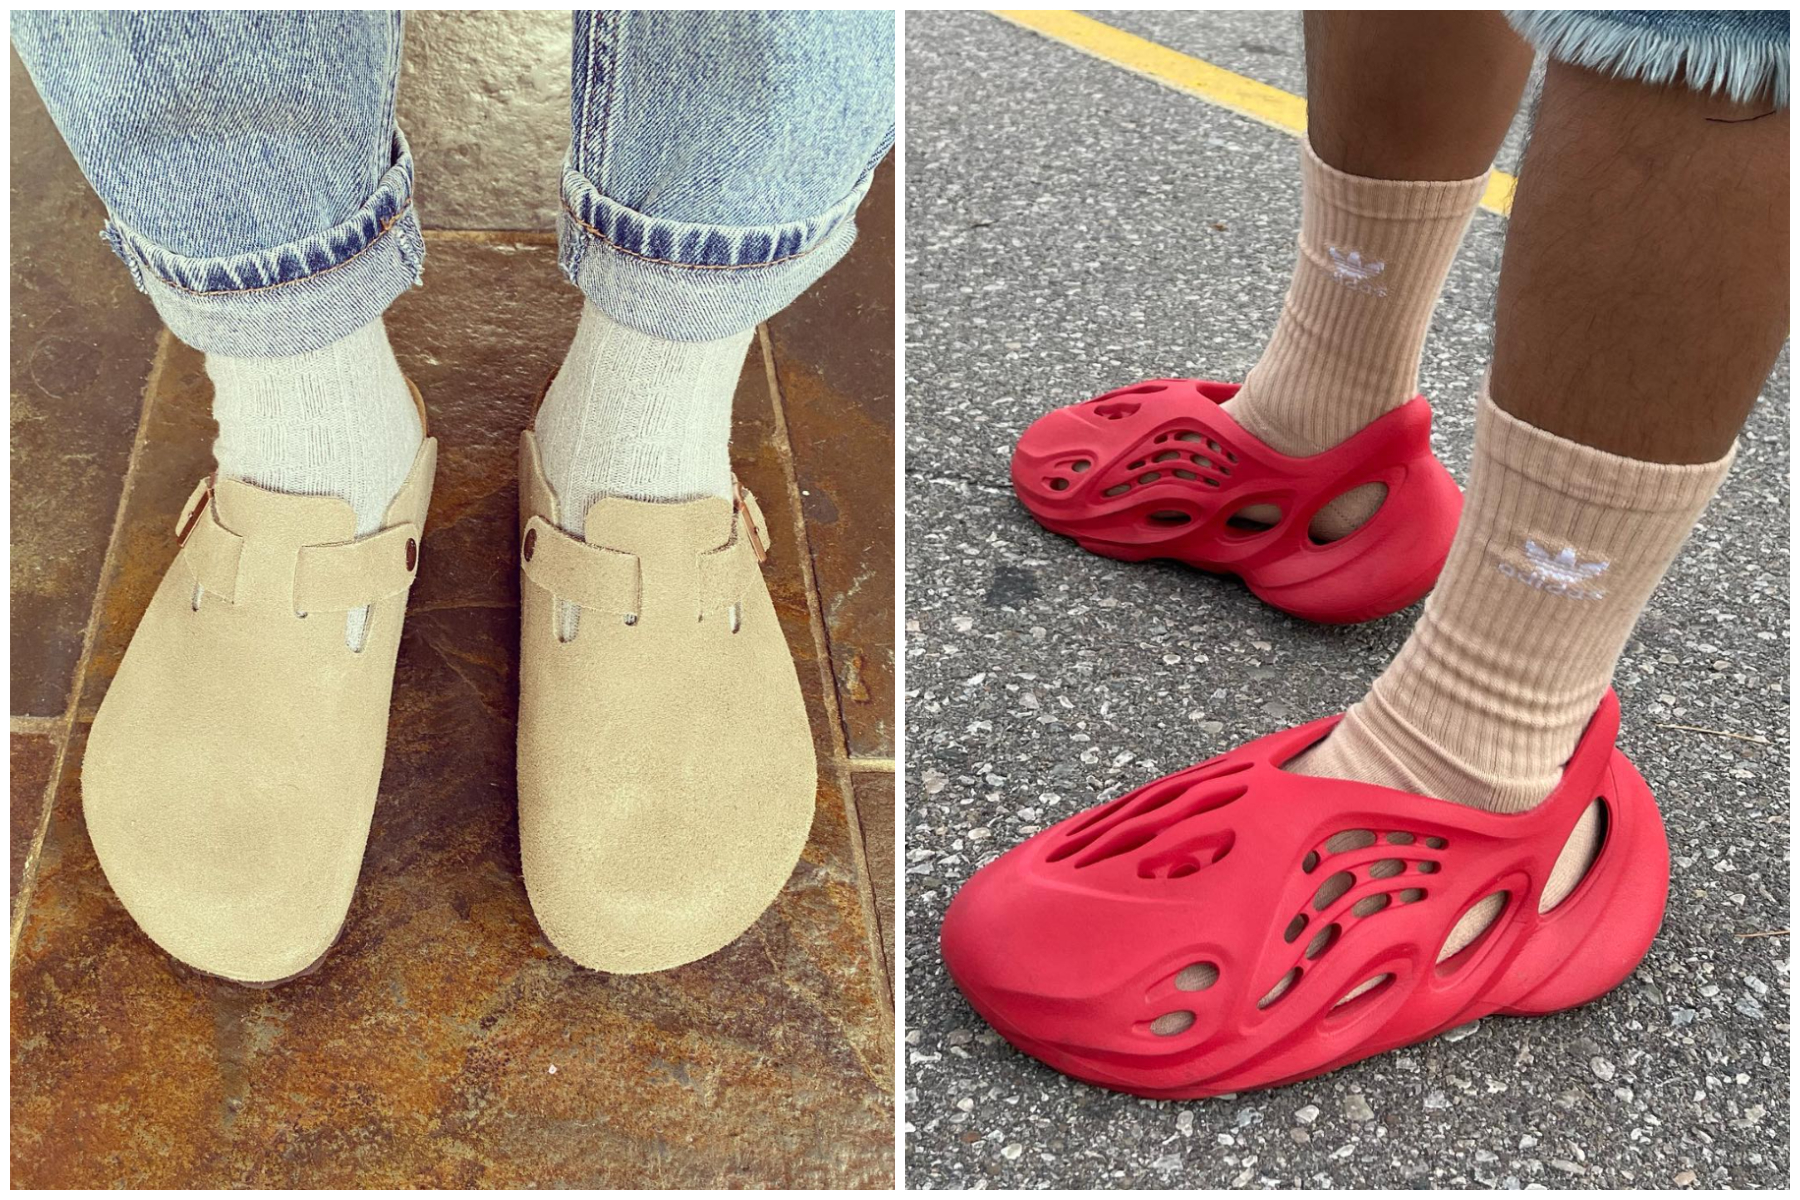 What's up with ugly shoes, and why are people obsessed with them?